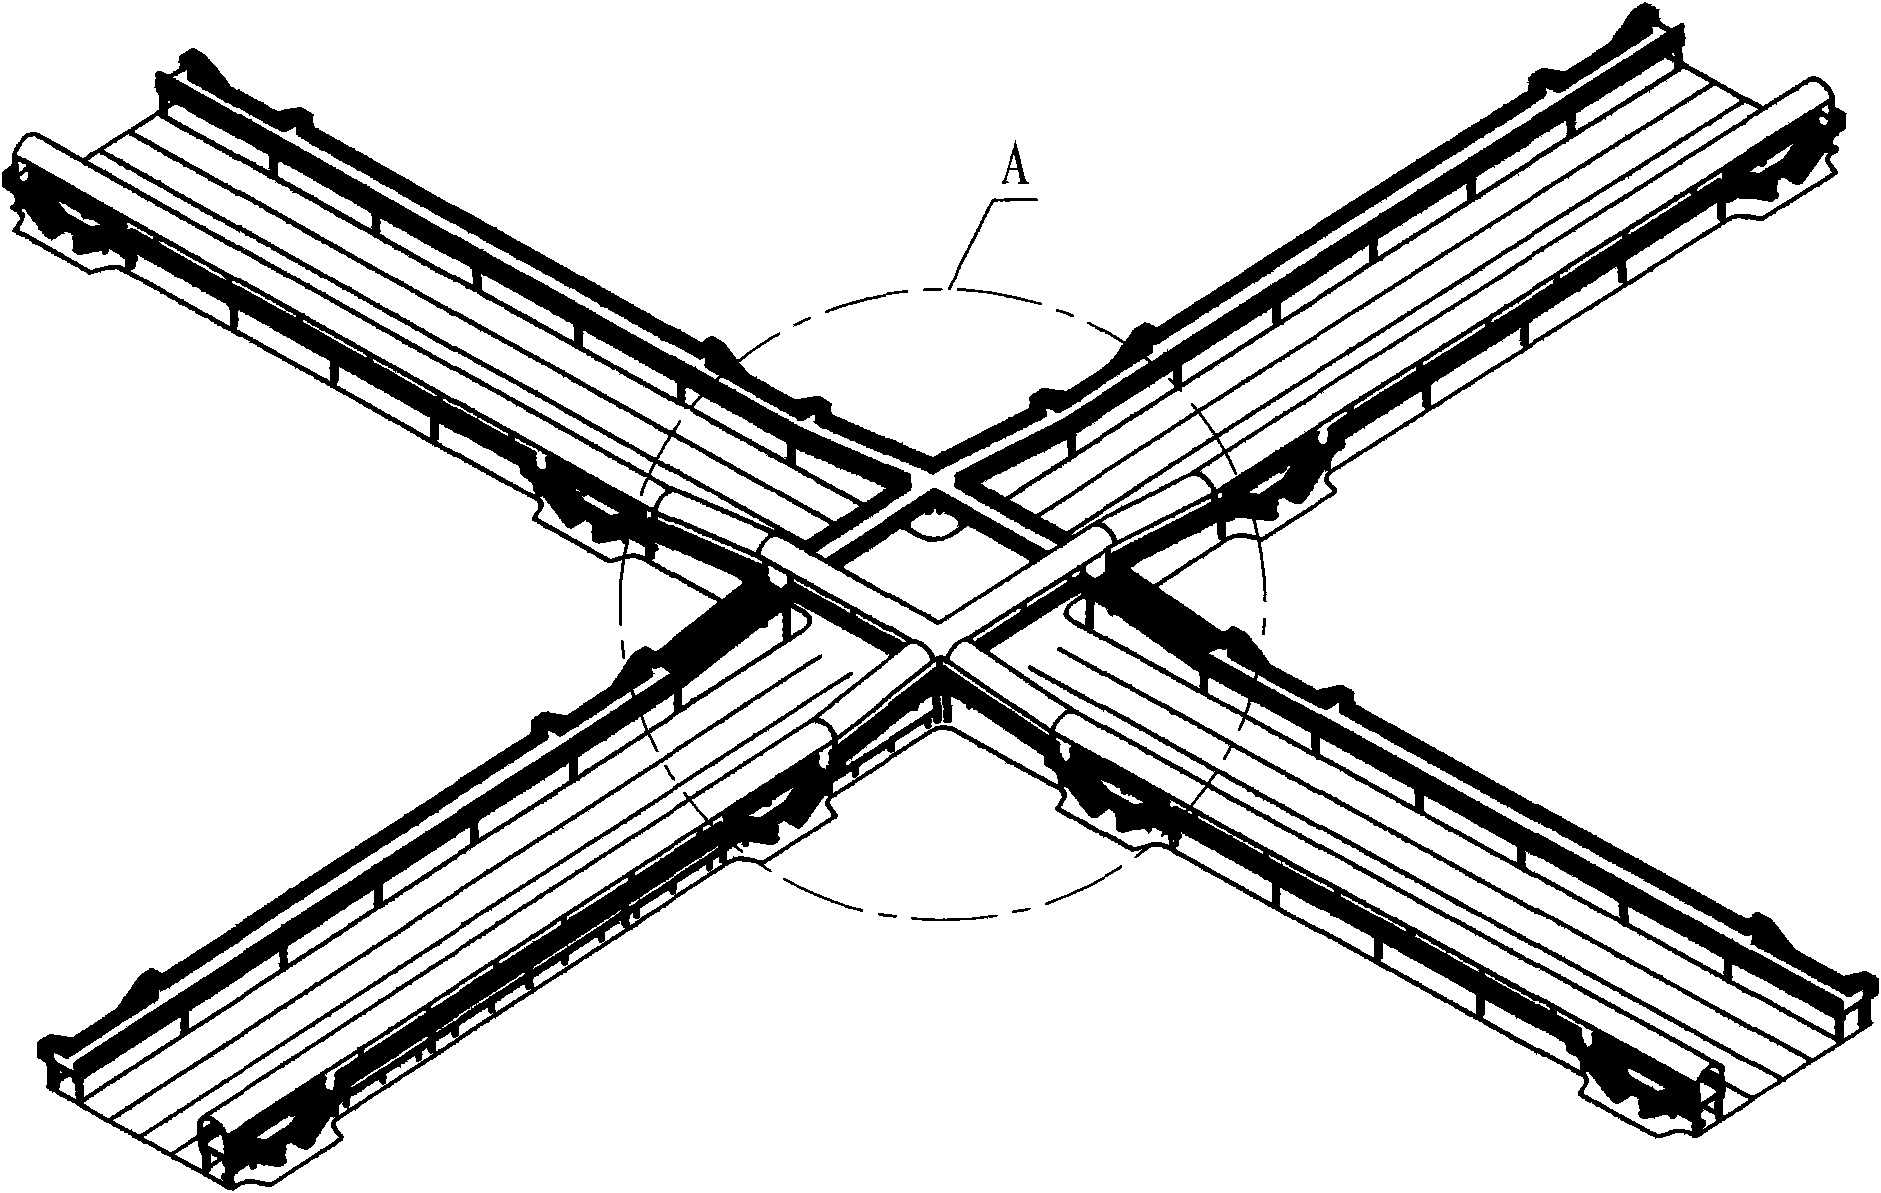 Overhead pavement for urban road